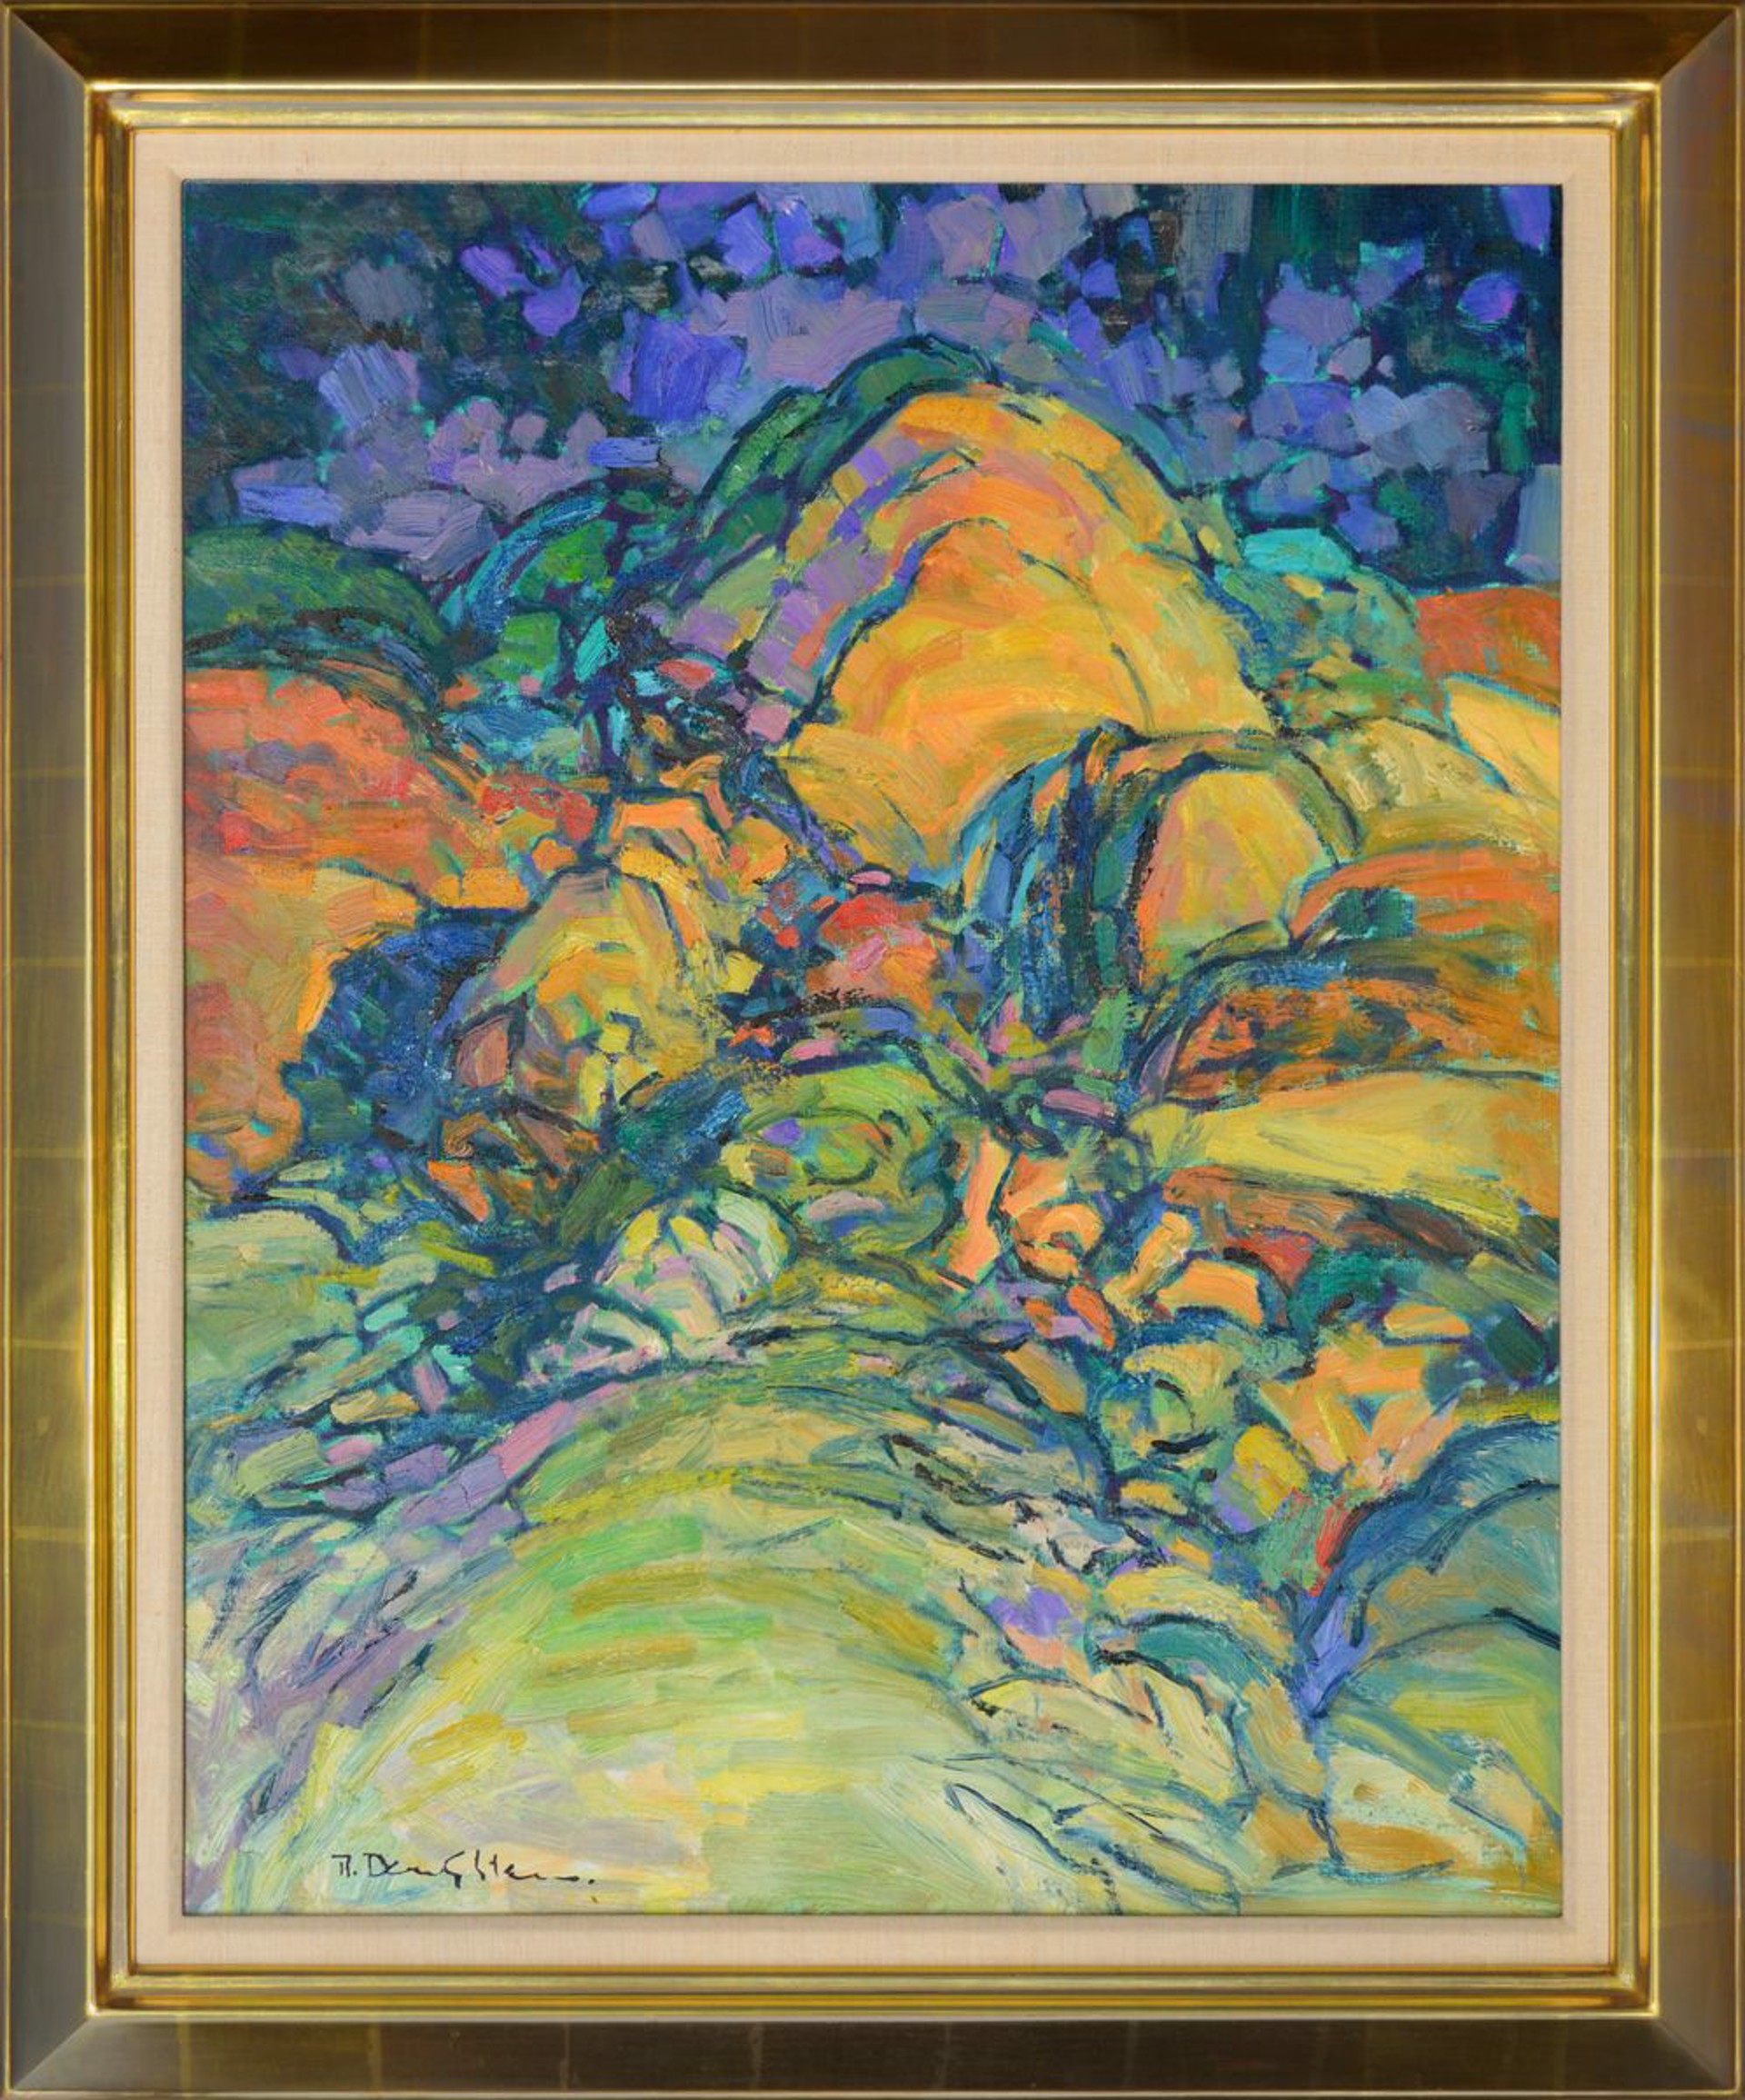 Abstract Mountain by Robert Daughters (1929-2013)